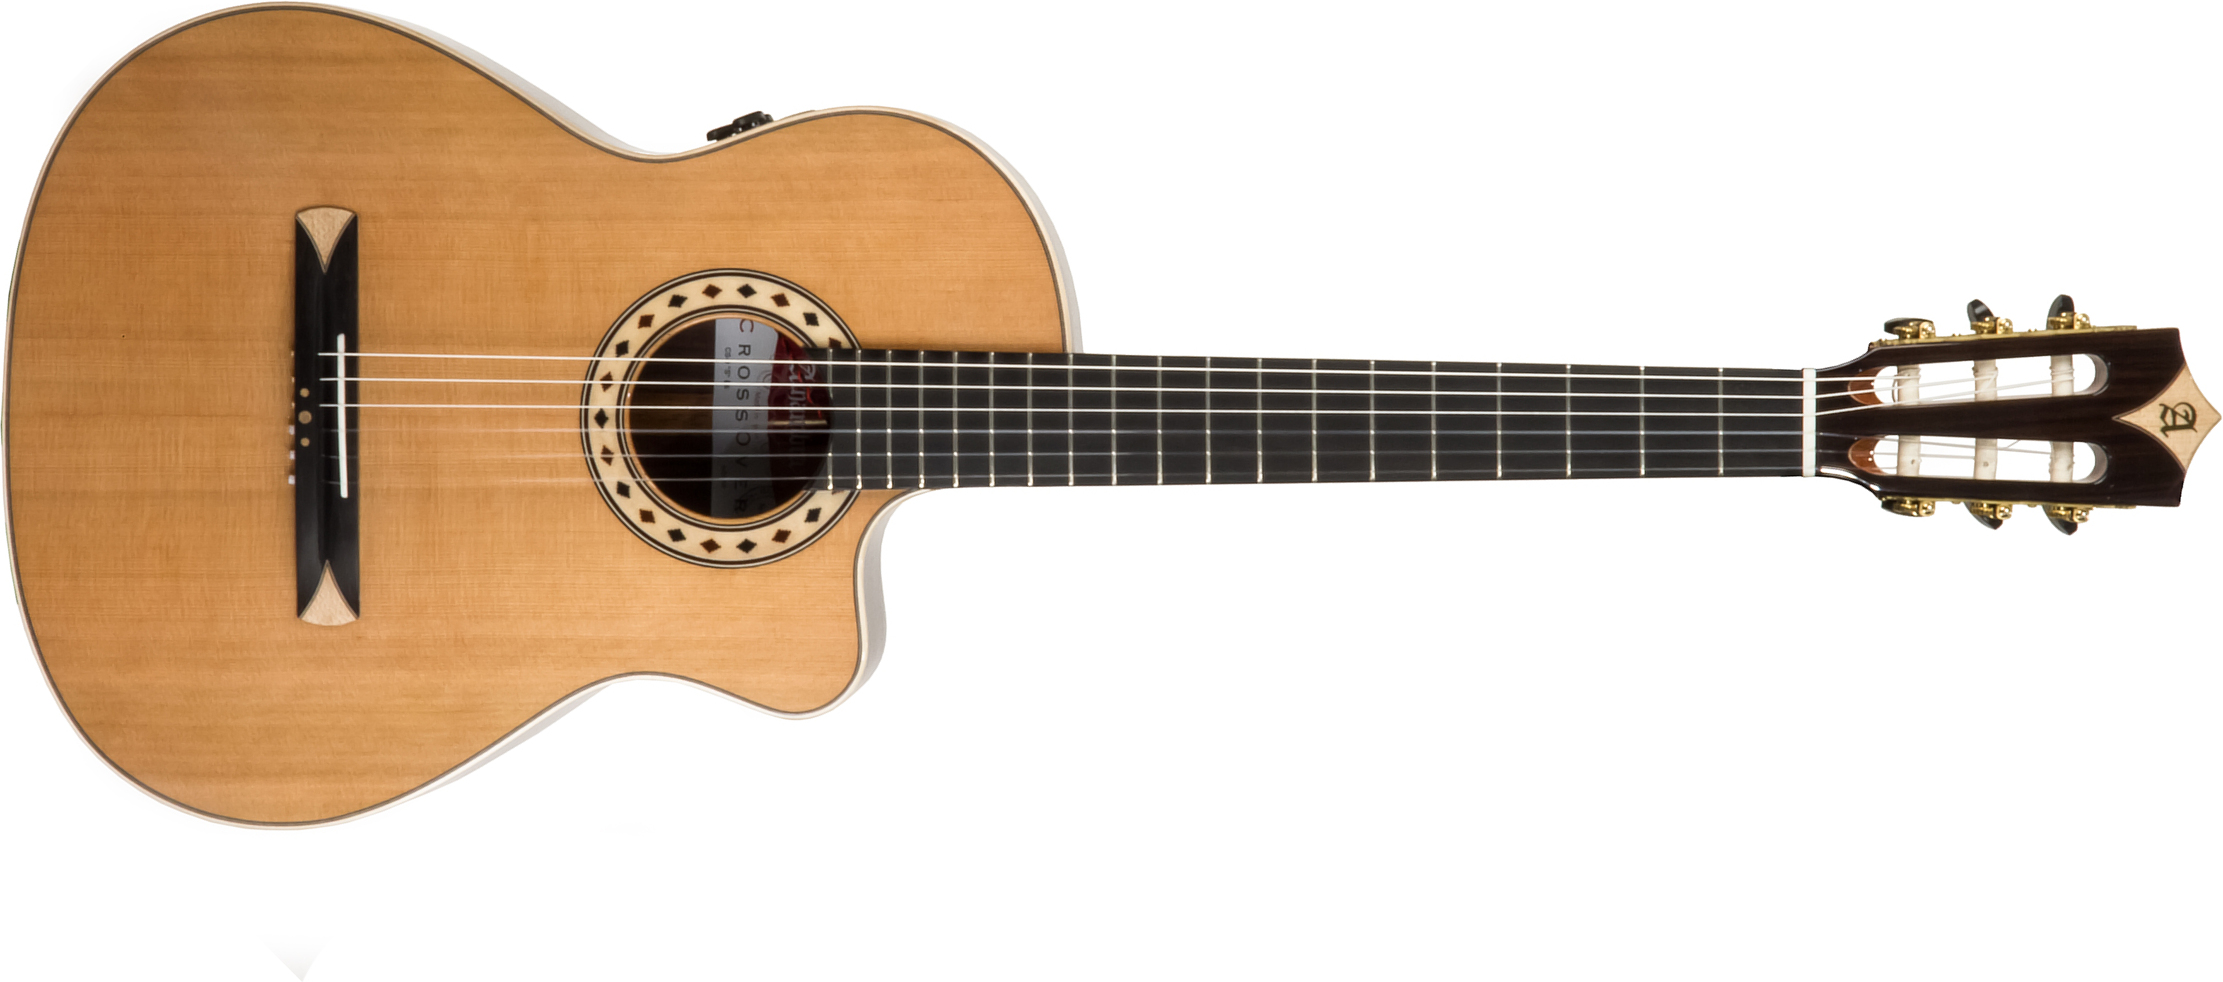 Alhambra Cs-3 Cw E8 Cross-over Cedre Palissandre Eb - Natural - Classical guitar 4/4 size - Main picture